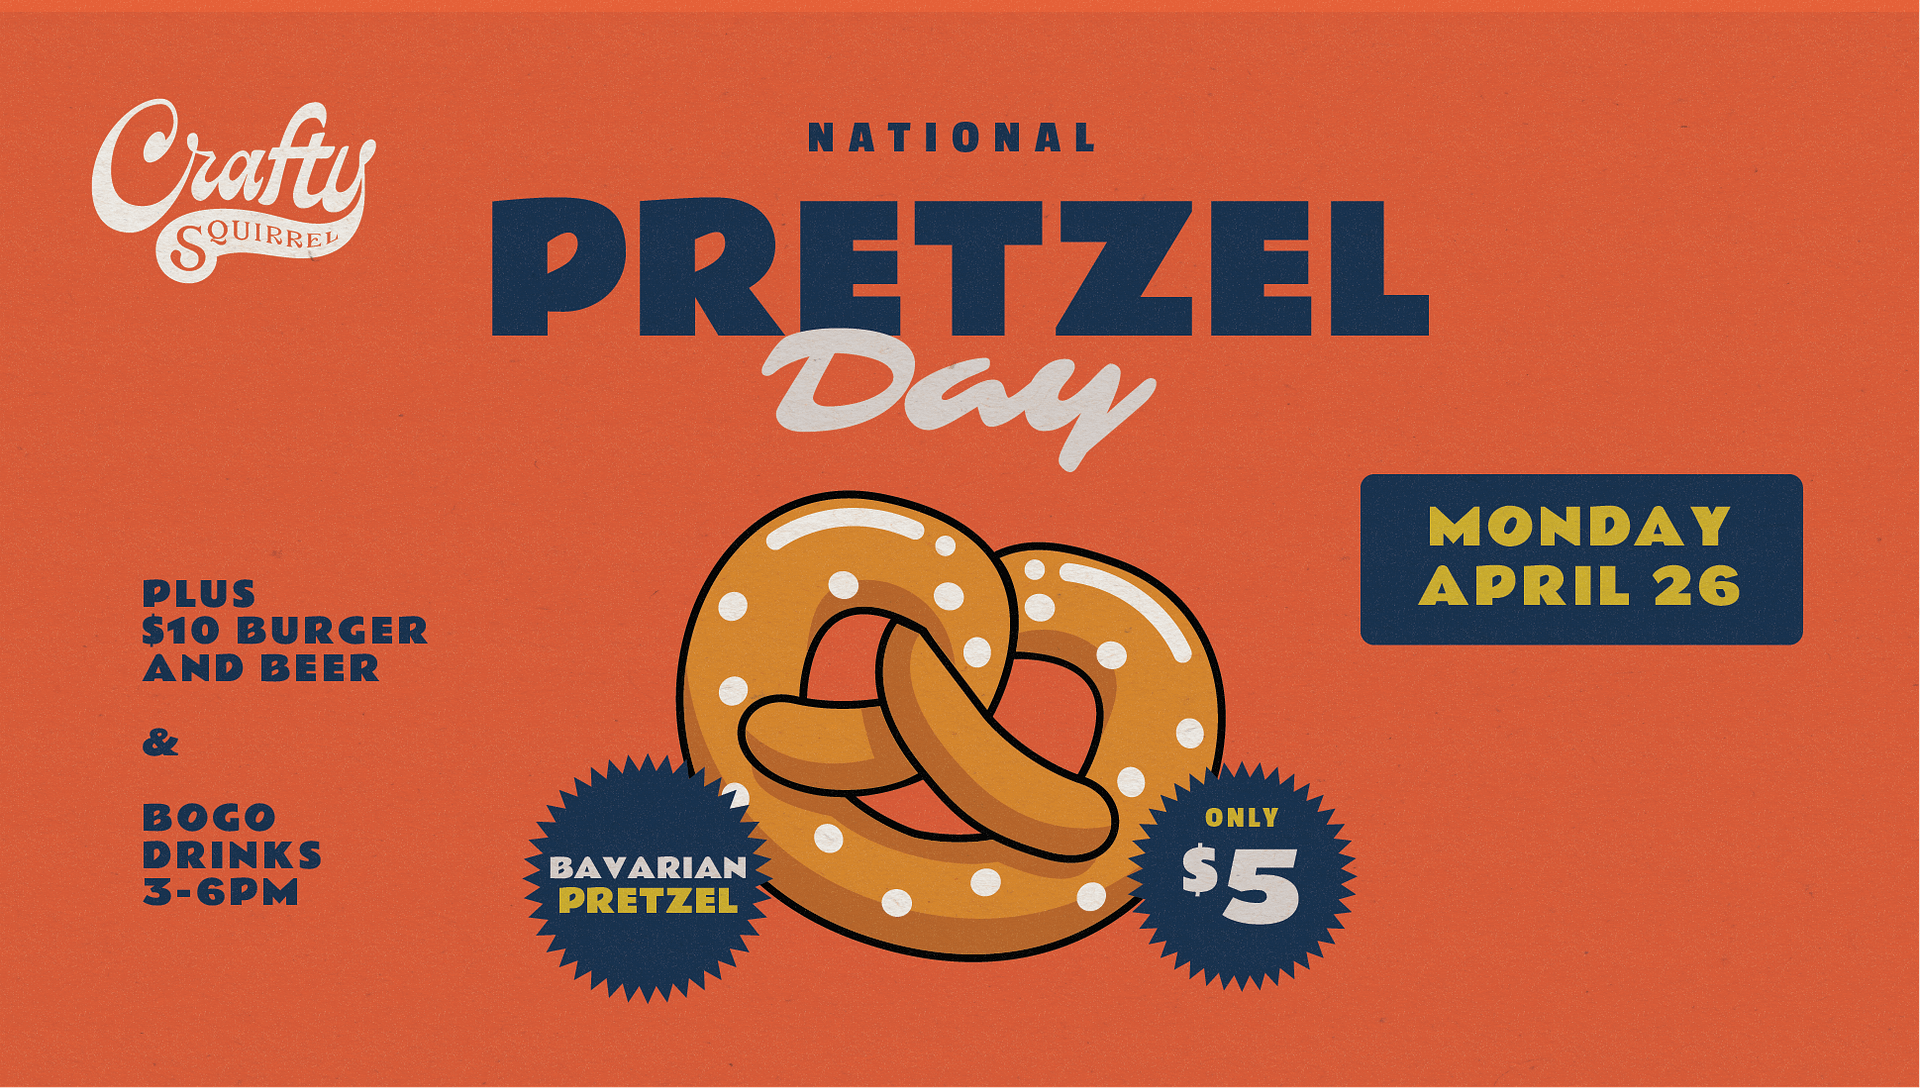 Celebrate National Pretzel Day at the Crafty Squirrel